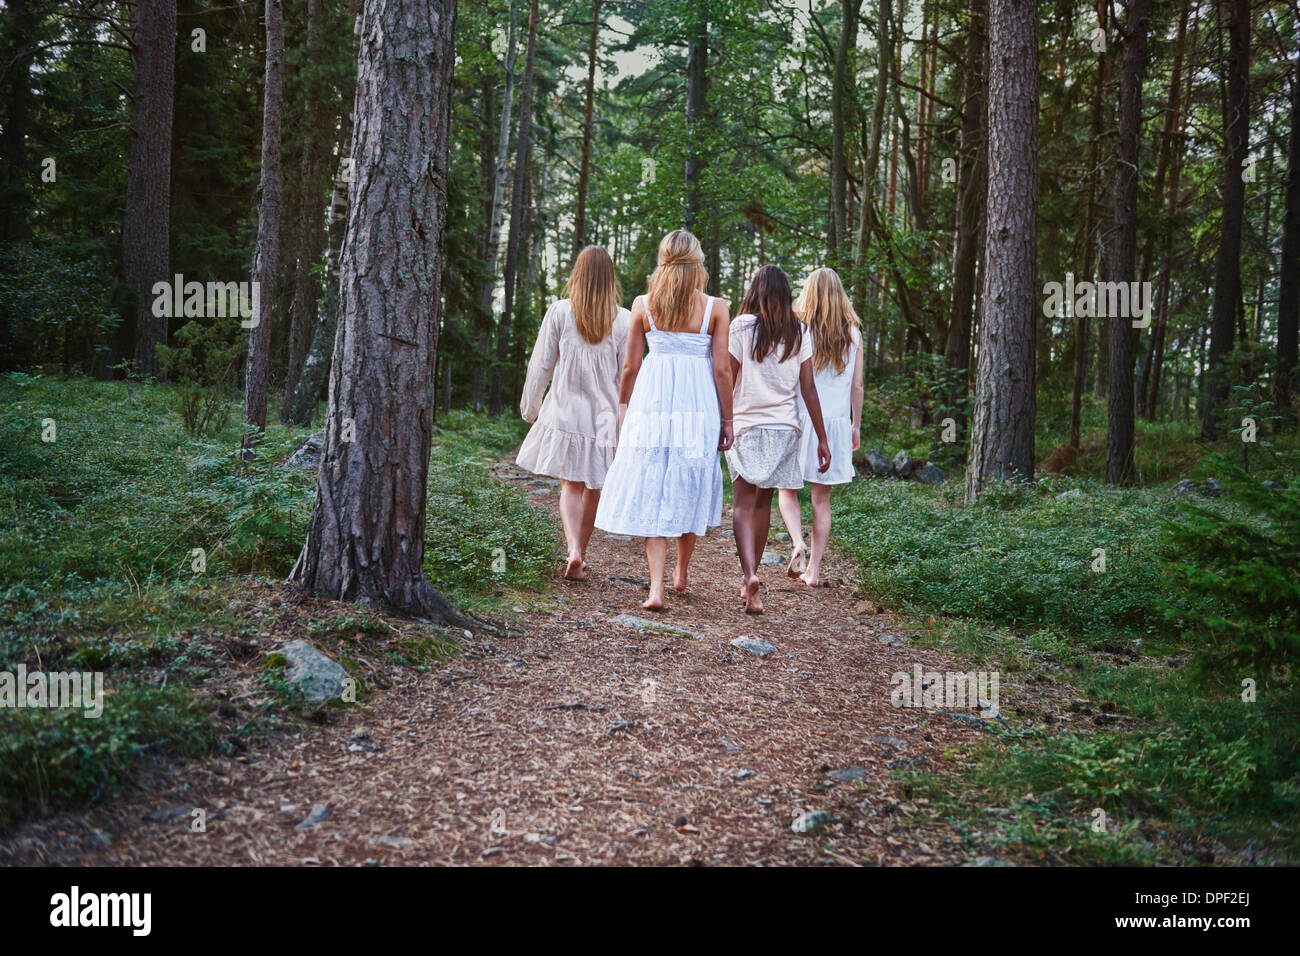 Teenage girls on forest track Stock Photo